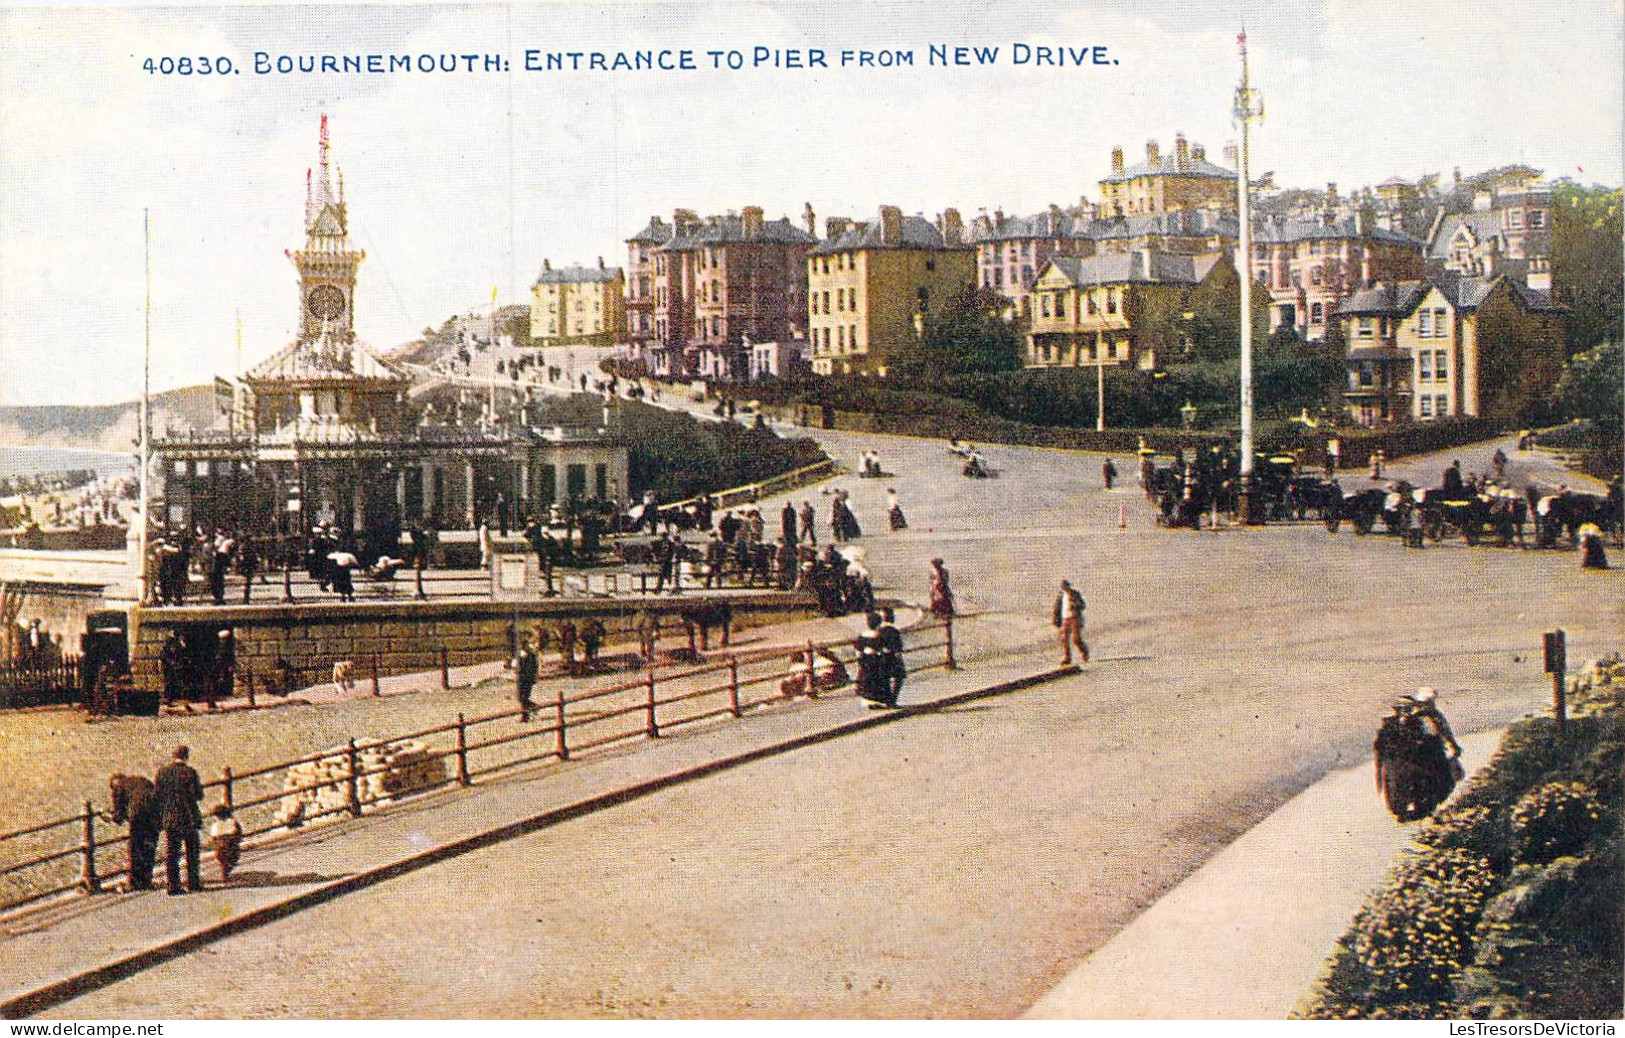 ANGLETERRE - Bournemouth - Entrance To Pier From New Drive - Carte Postale Ancienne - Bournemouth (ab 1972)